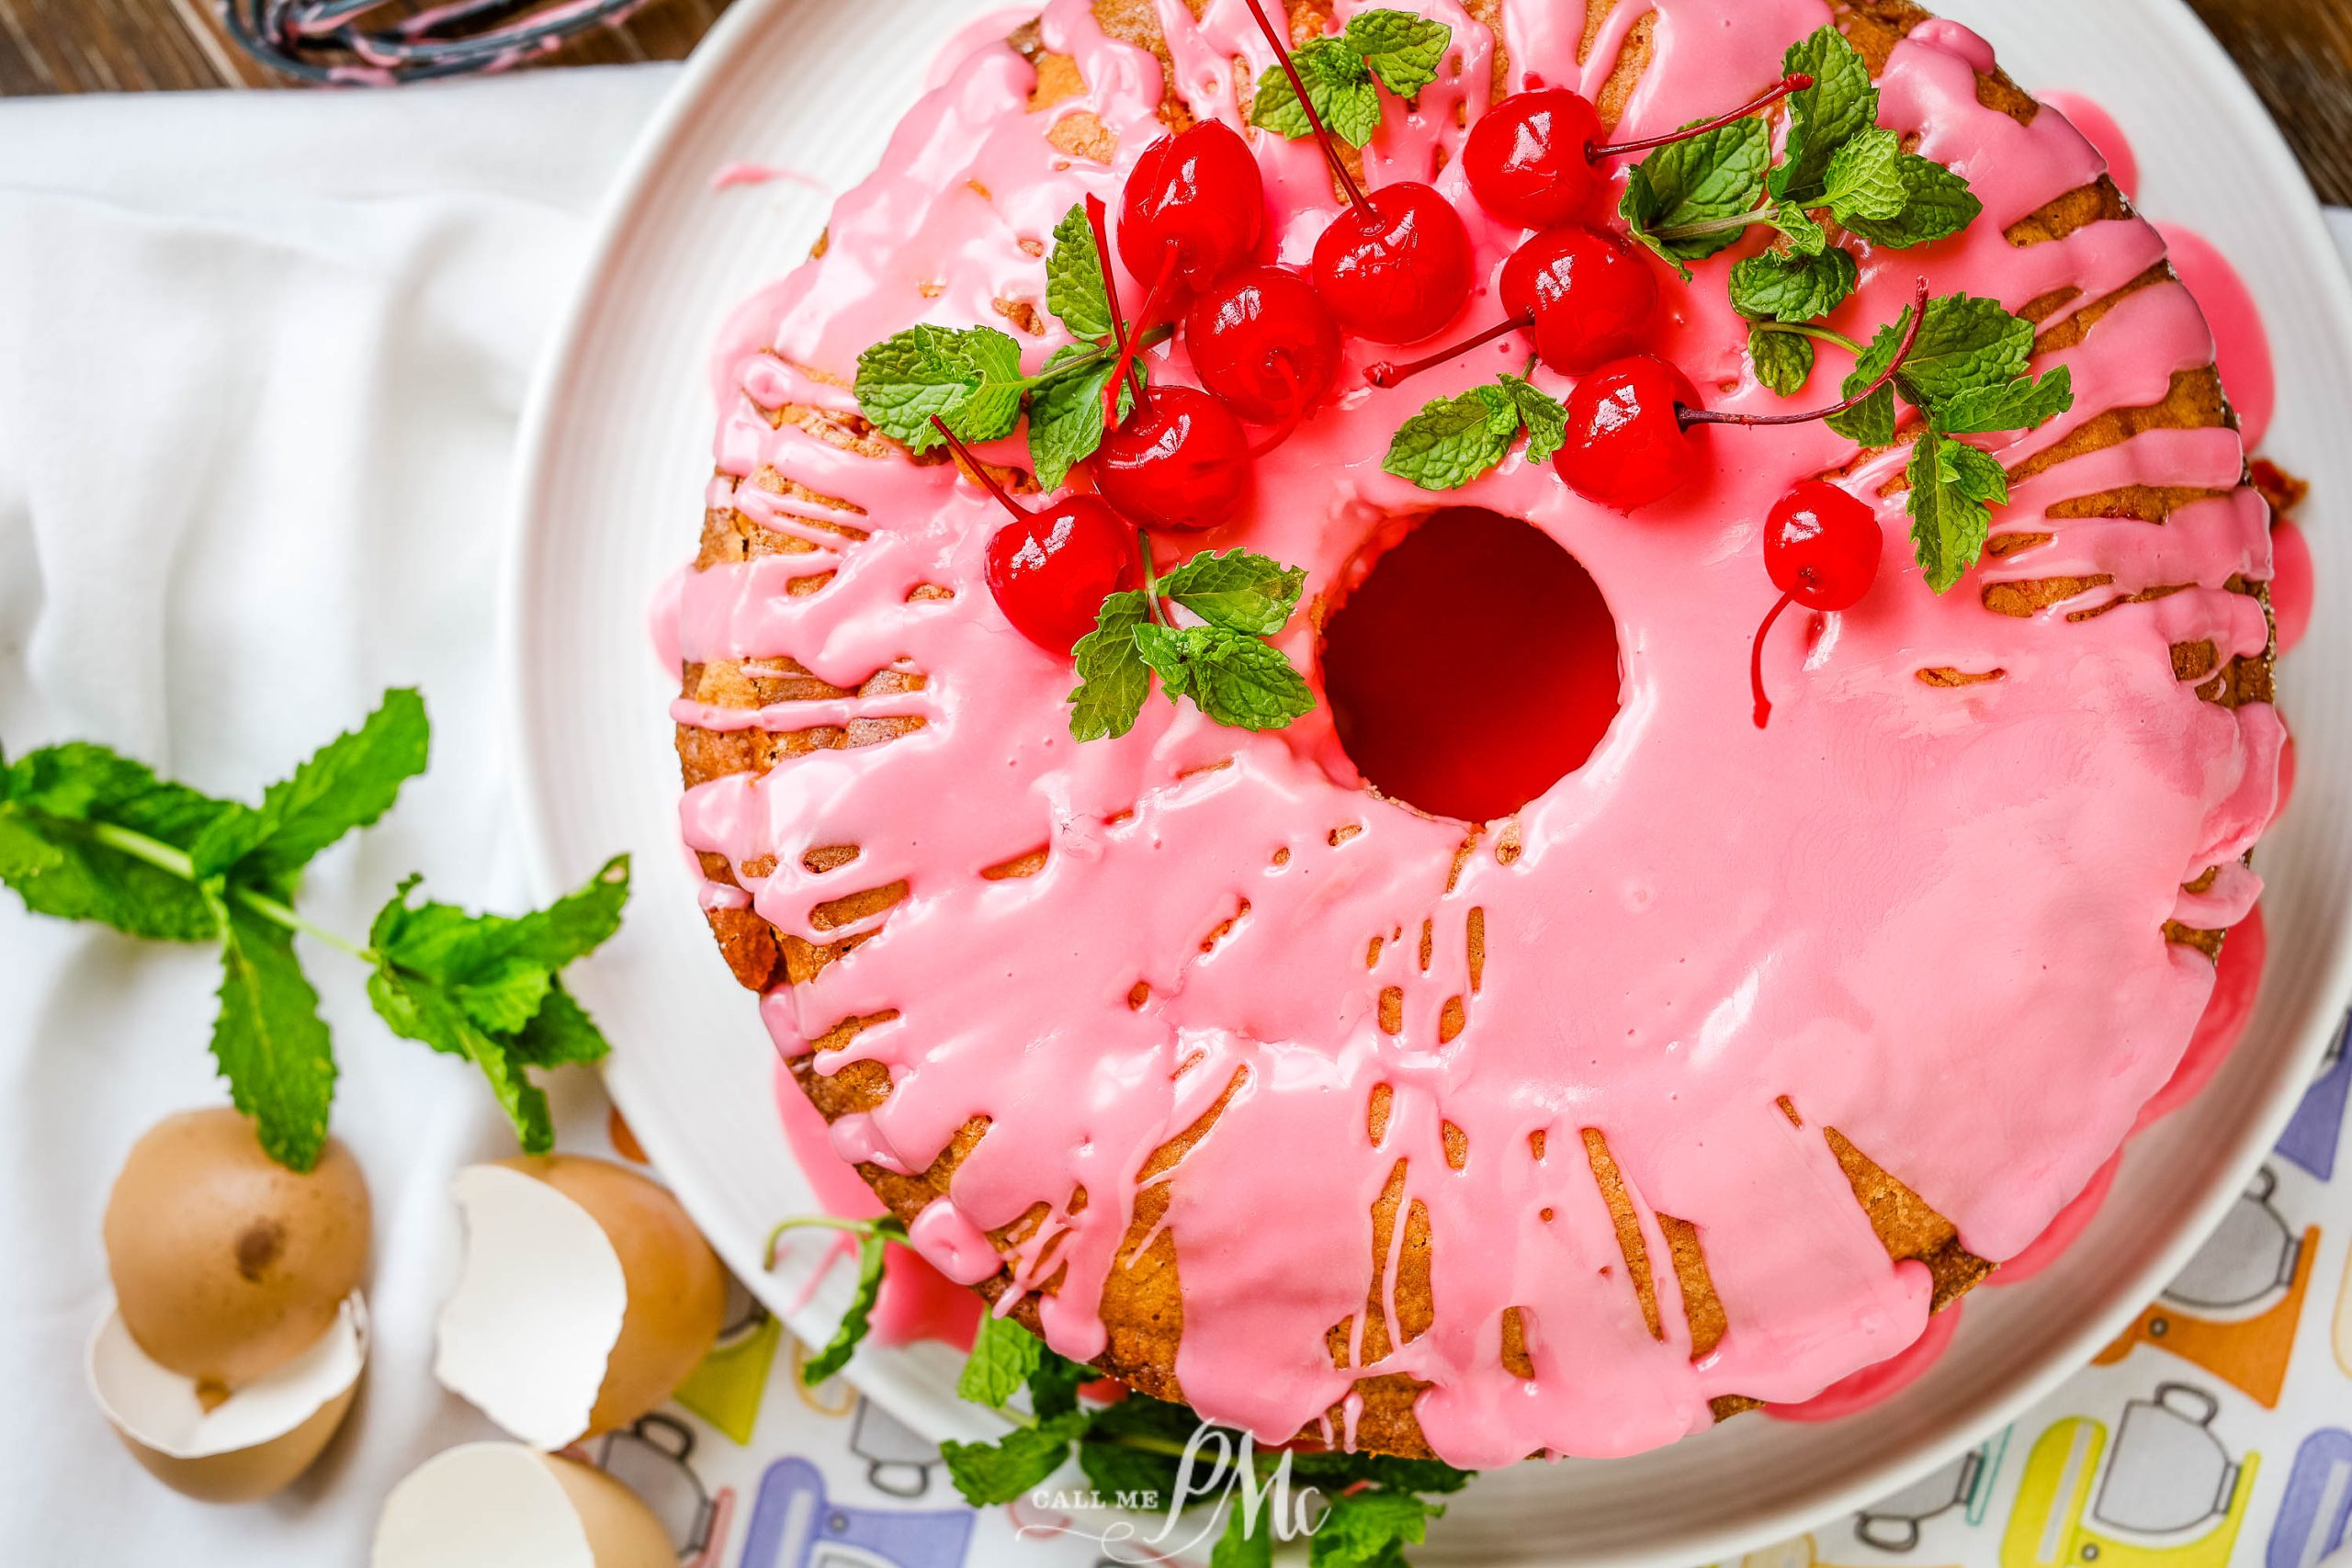 Flatlay of whole pound cake with pink frosting and cherries.